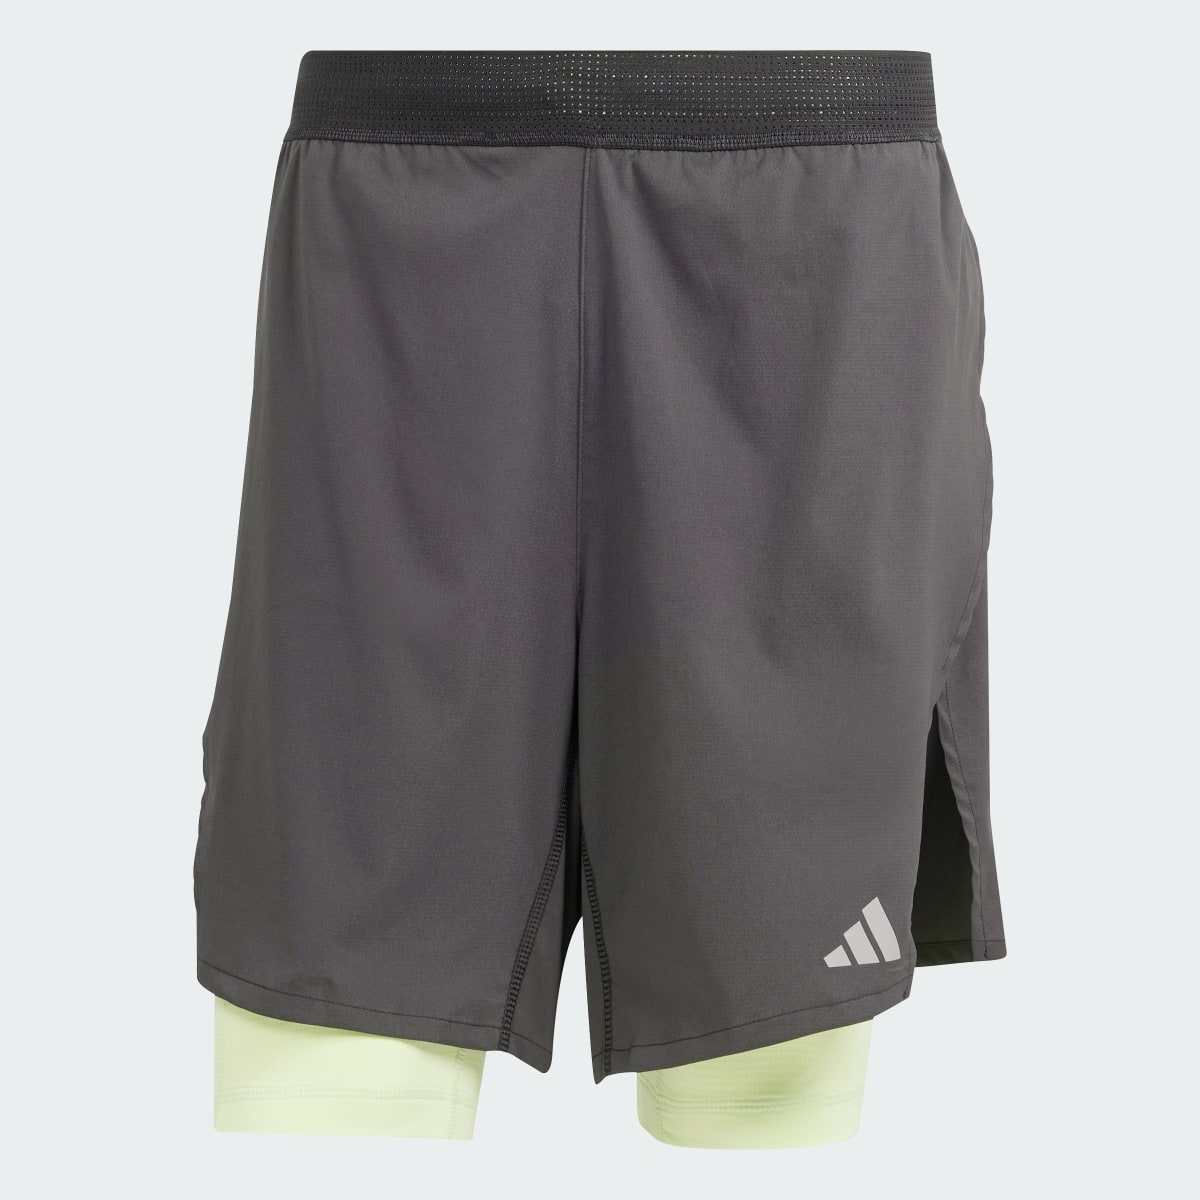 Adidas HIIT Workout HEAT.RDY 2-in-1 Shorts. 4